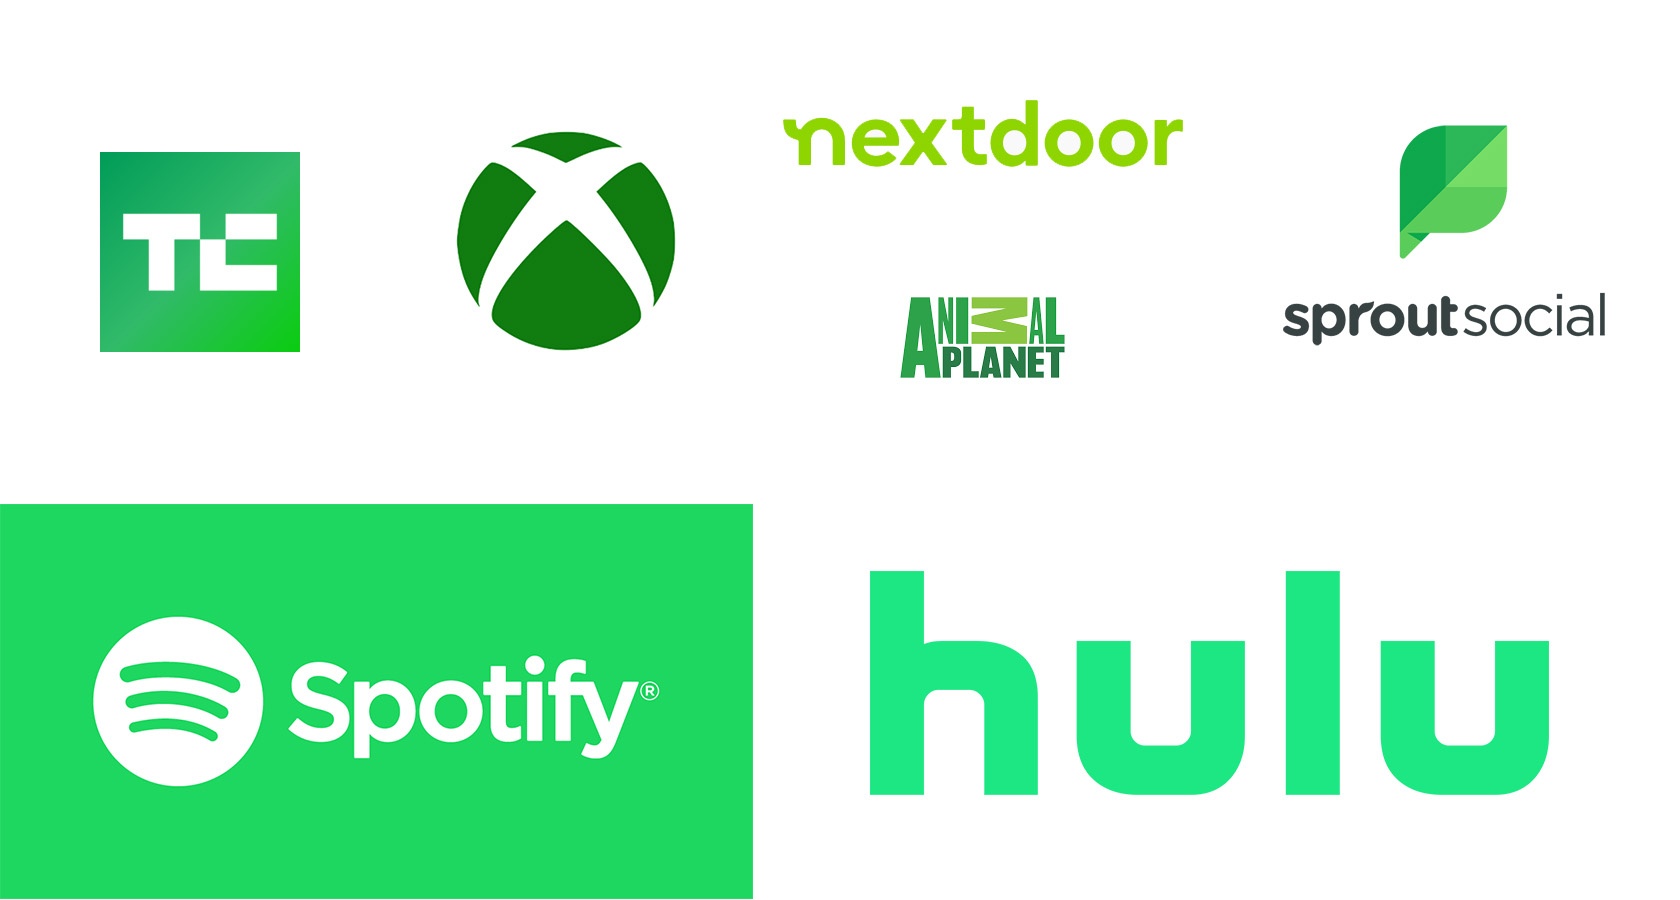 Media and entertainment brands that use green in their logos